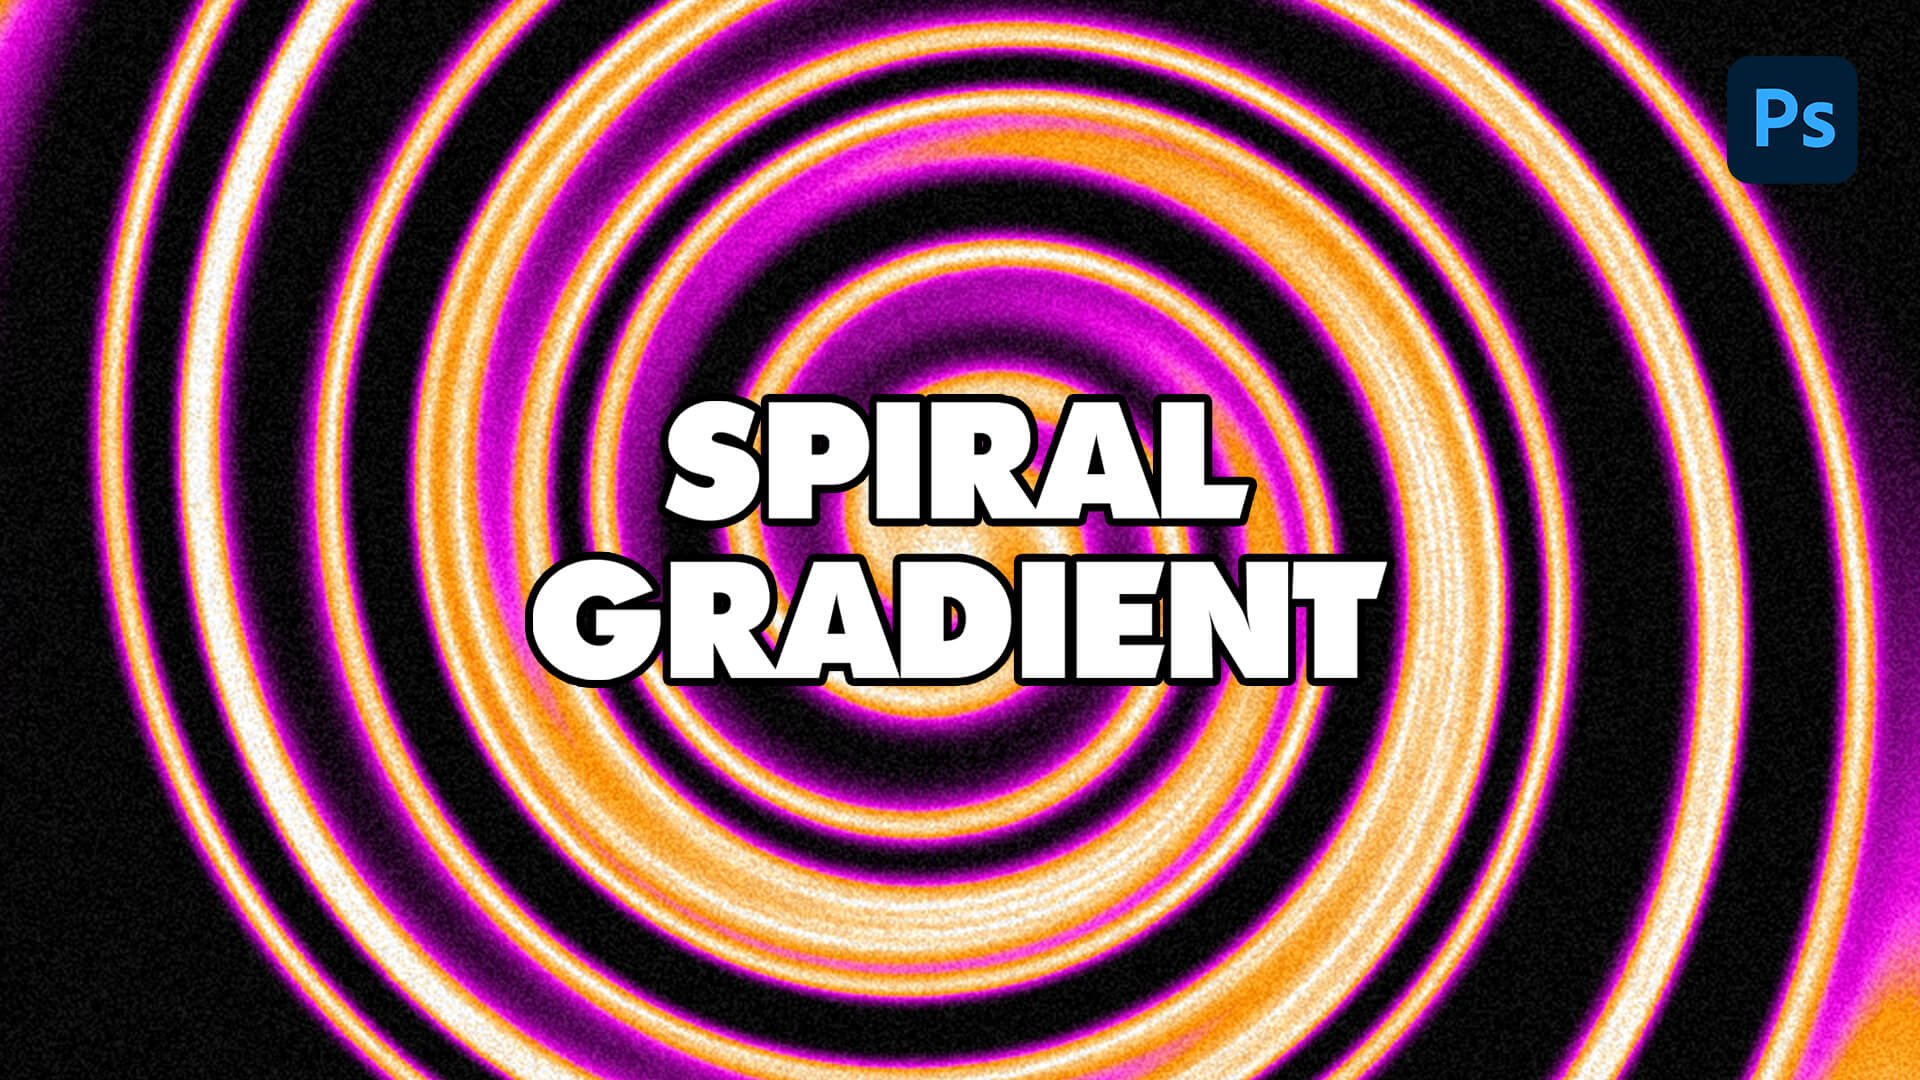 How to Create Spiral Gradient in Photoshop